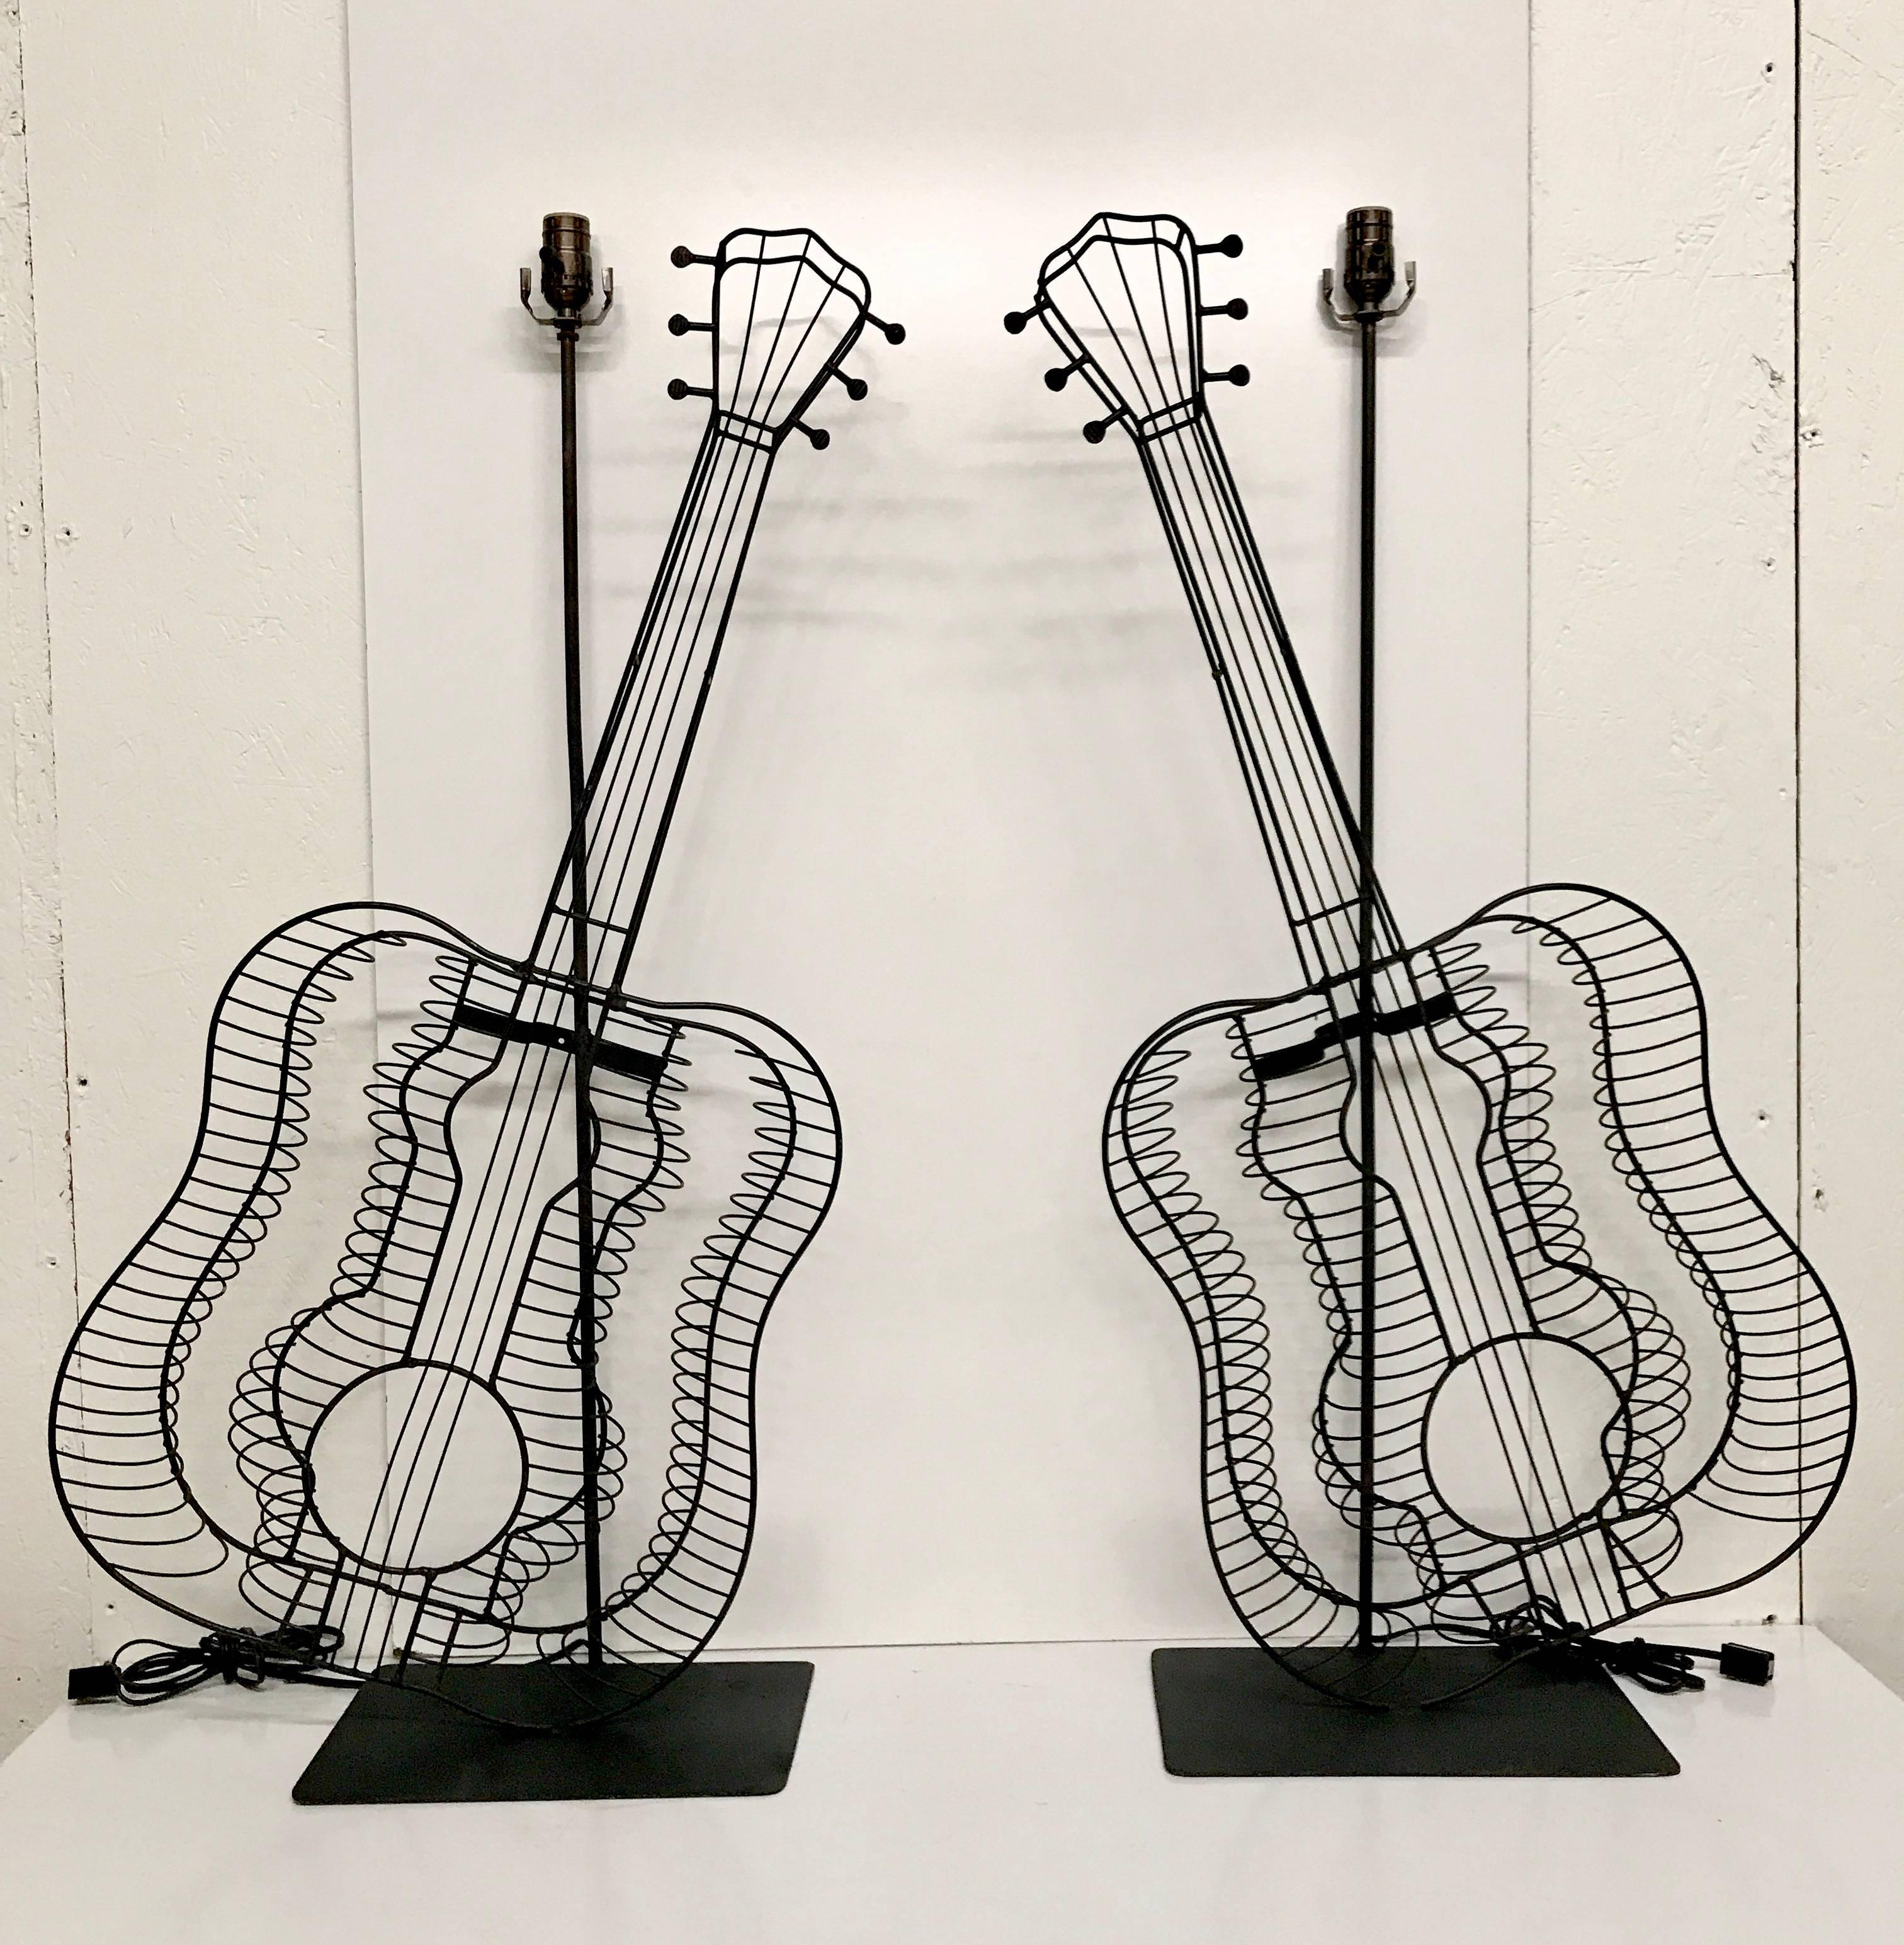 A pair of Fredrick Weinberg Style  guitar lamps, one facing right the other facing left. The actual sculptures measure 38 inches high x 4 inches deep.